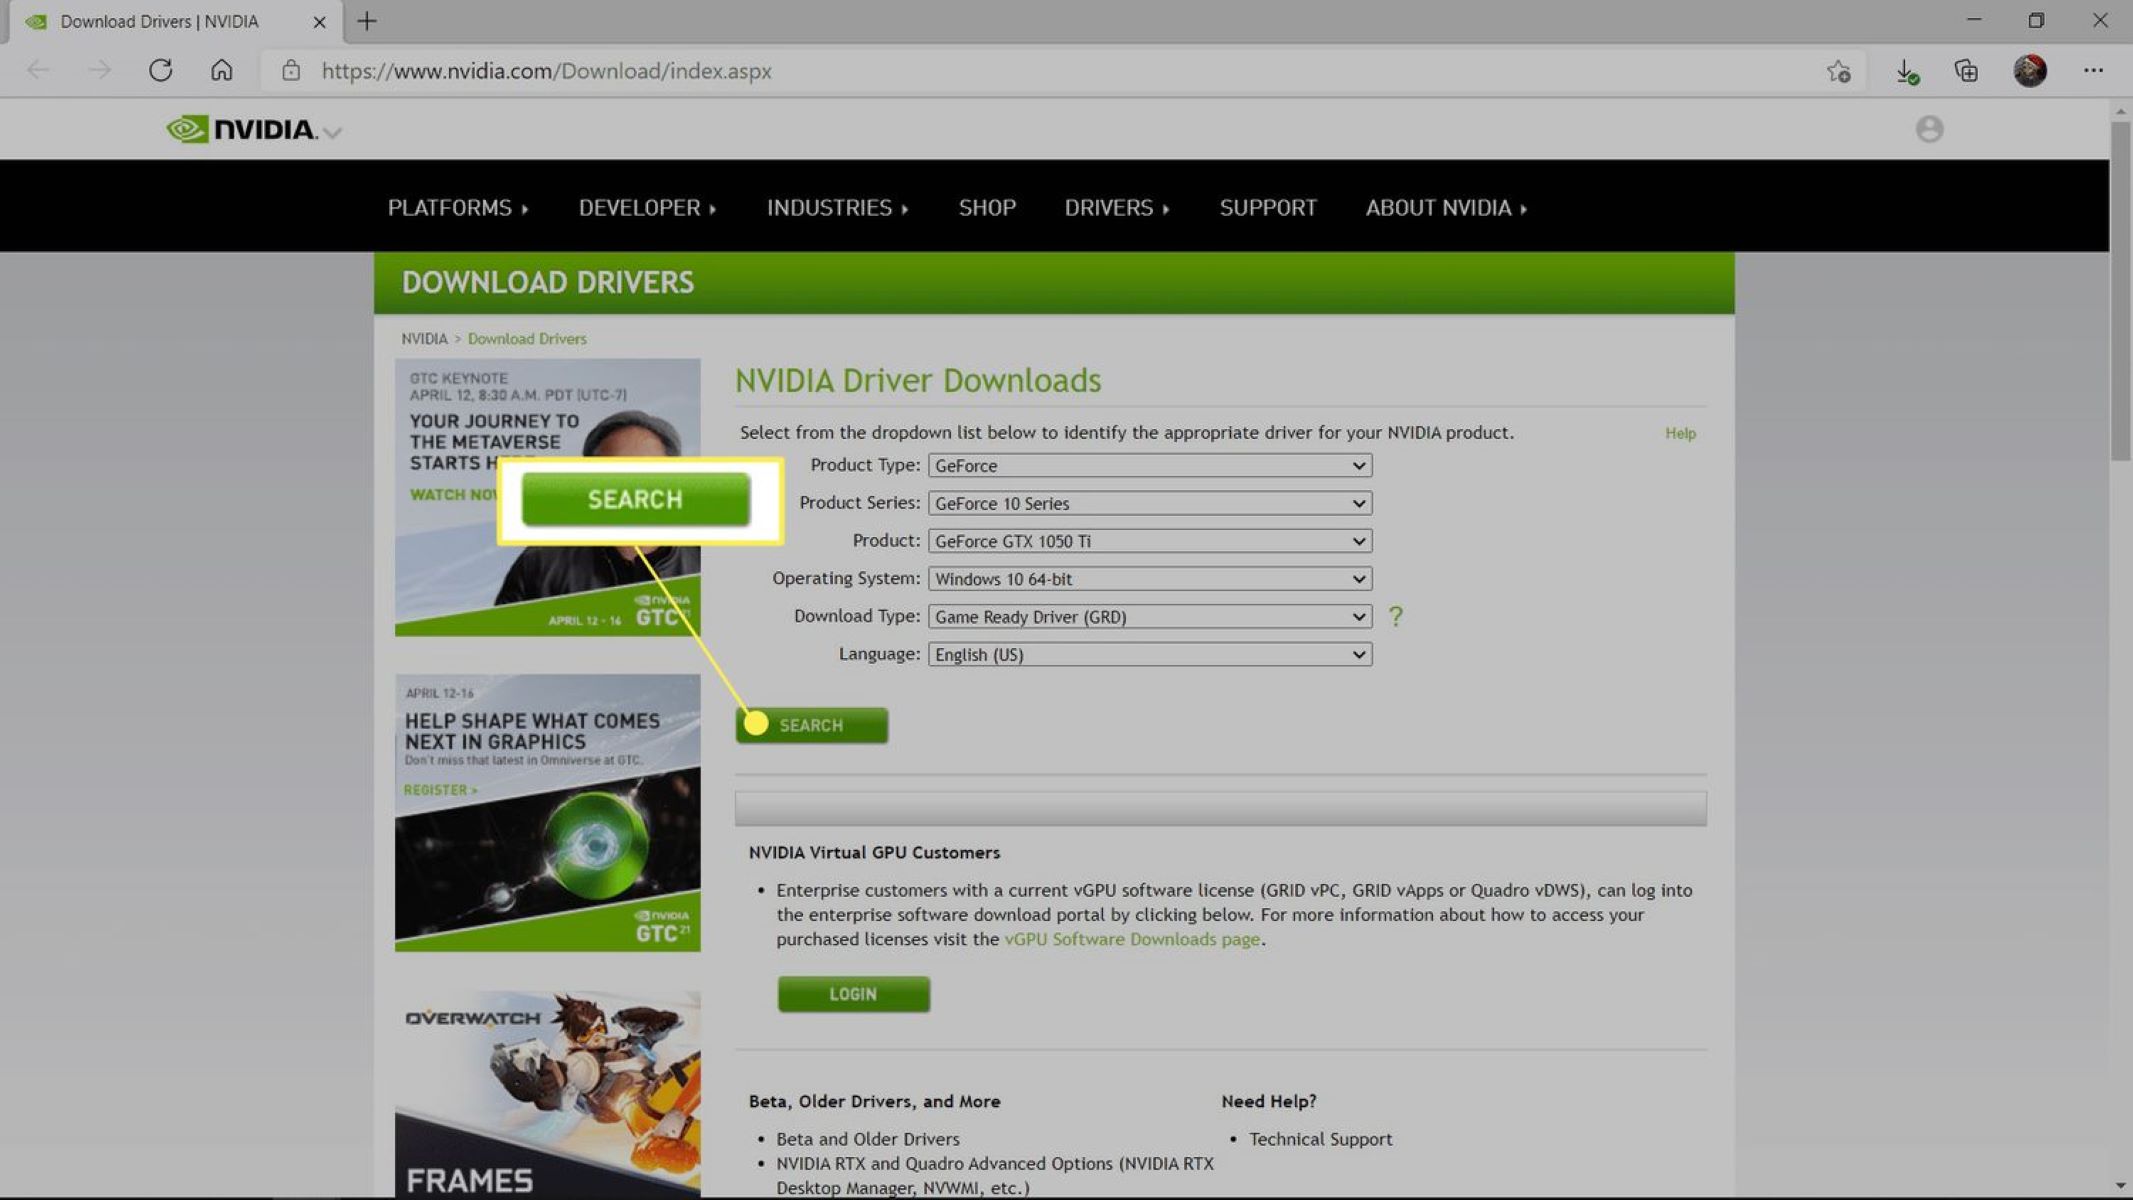 How To Update Nvidia Drivers